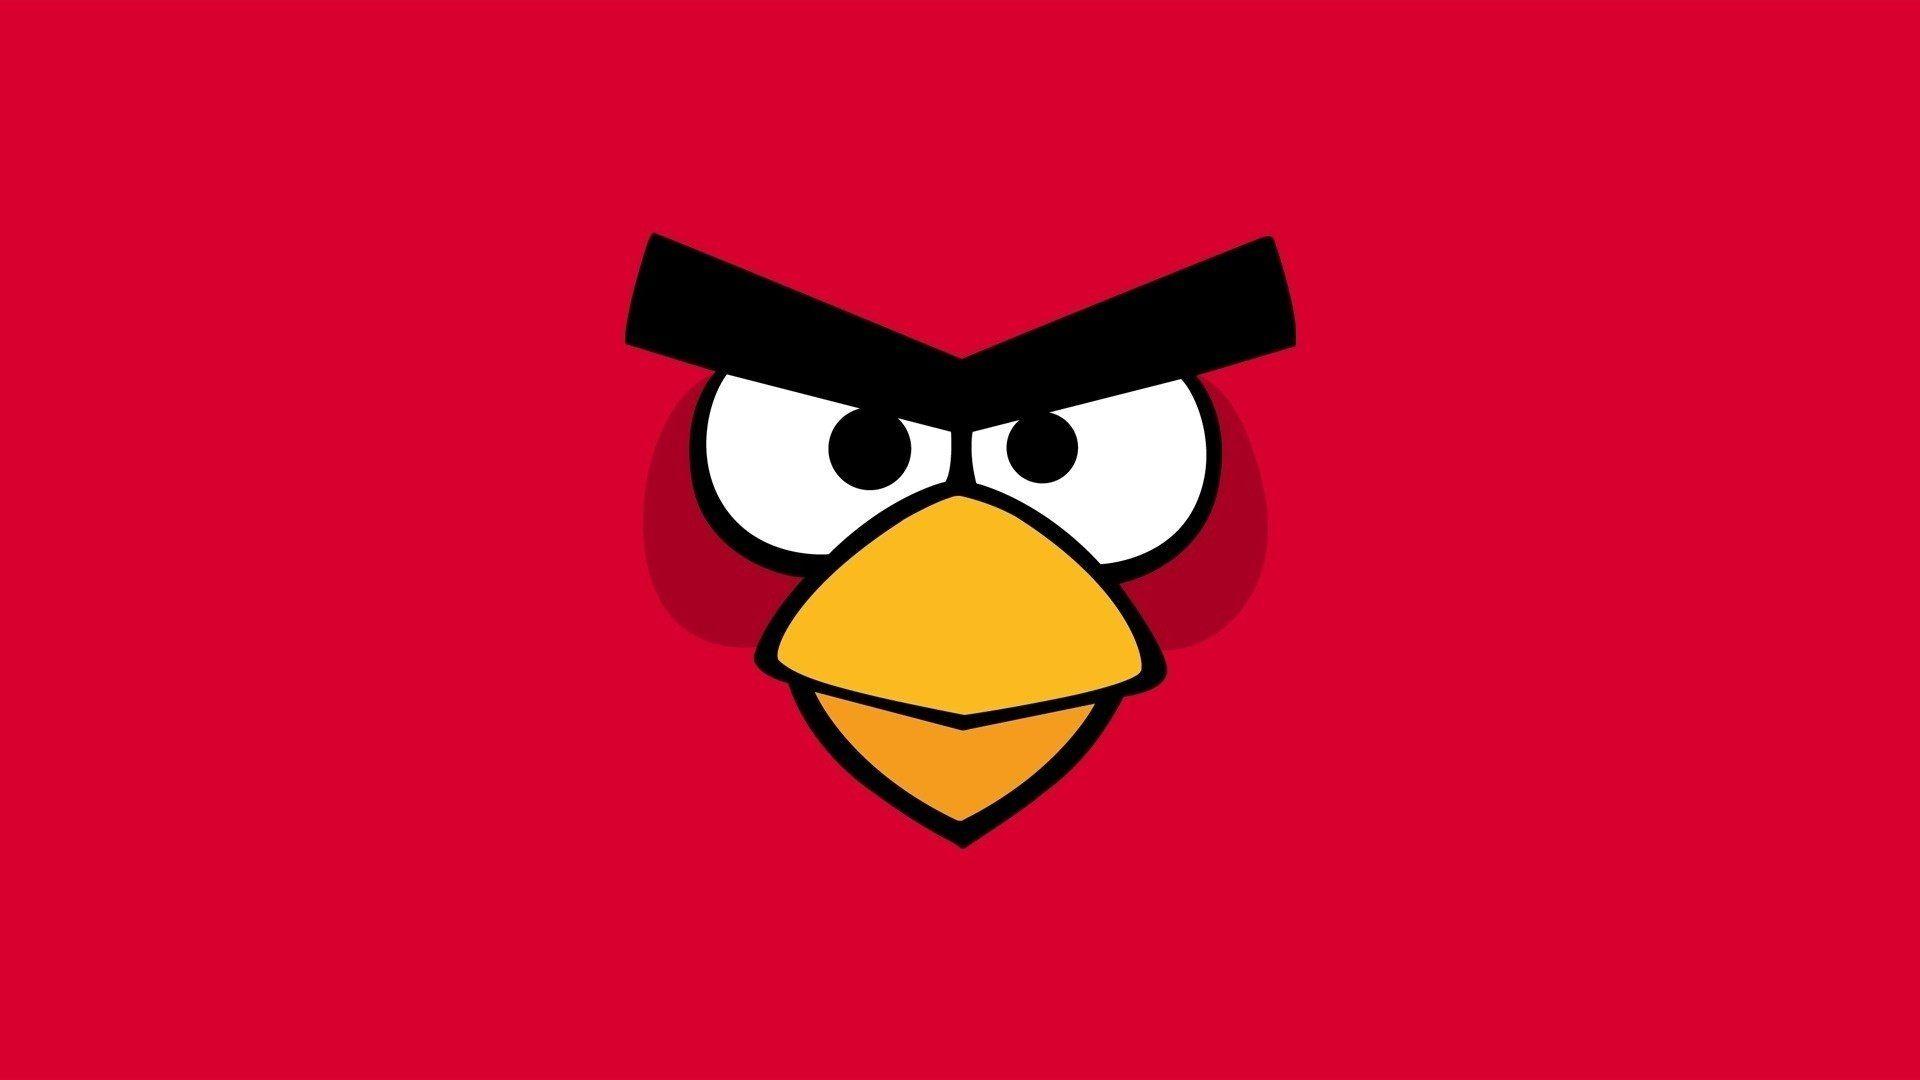 Angry Birds Hd Wallpapers Top Free Angry Birds Hd Backgrounds Wallpaperaccess